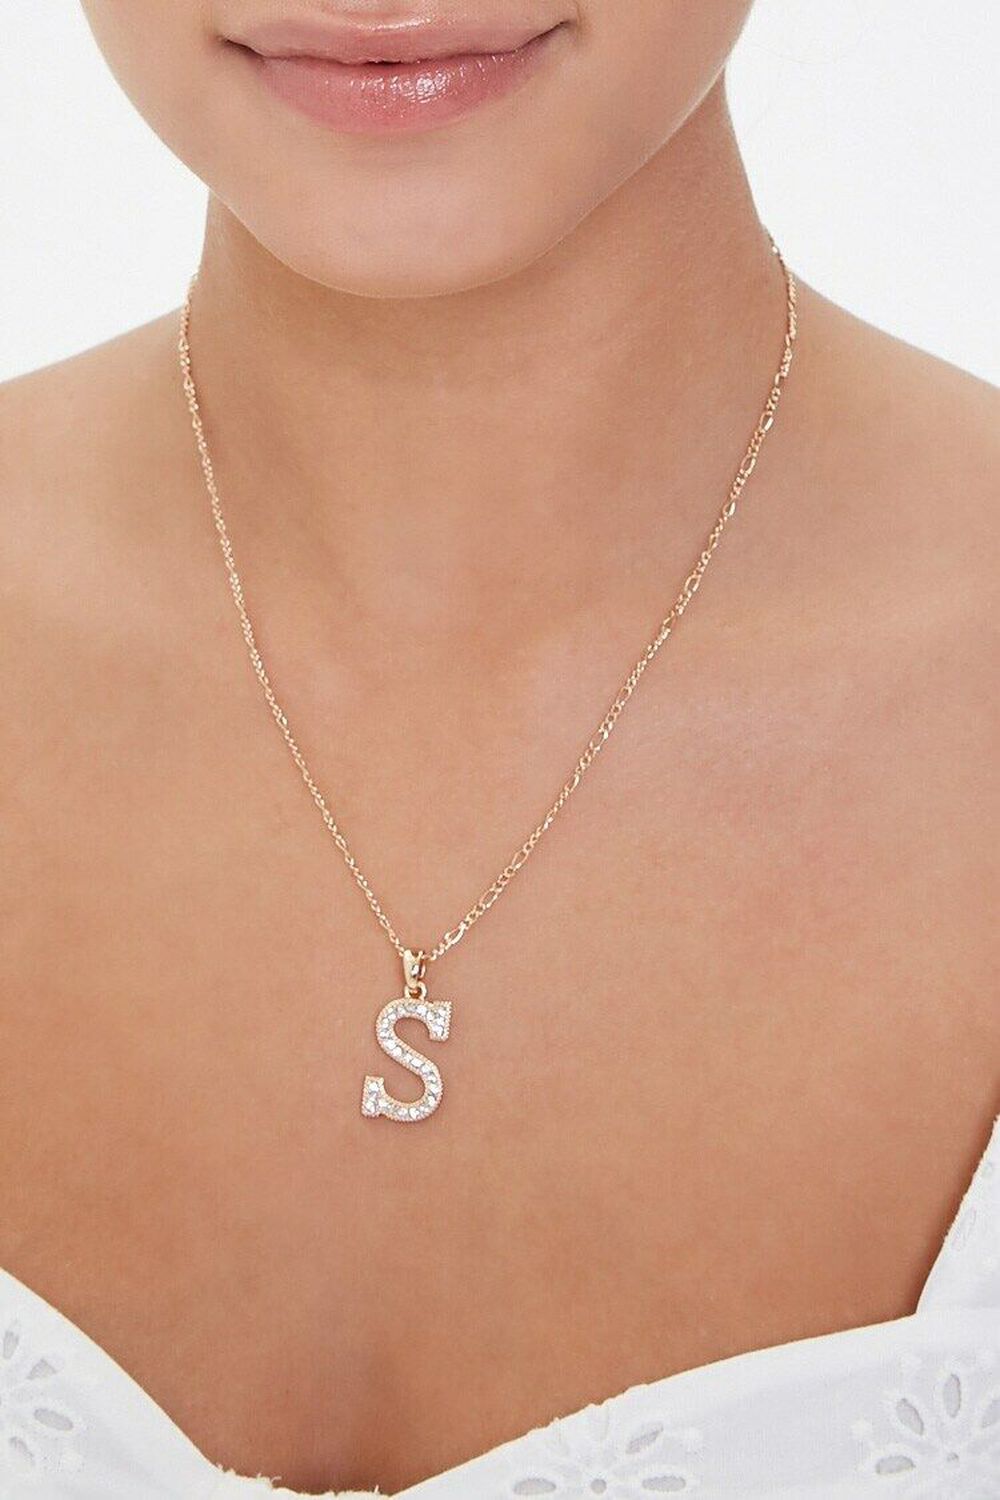 GOLD/S Initial Pendant Necklace, image 1